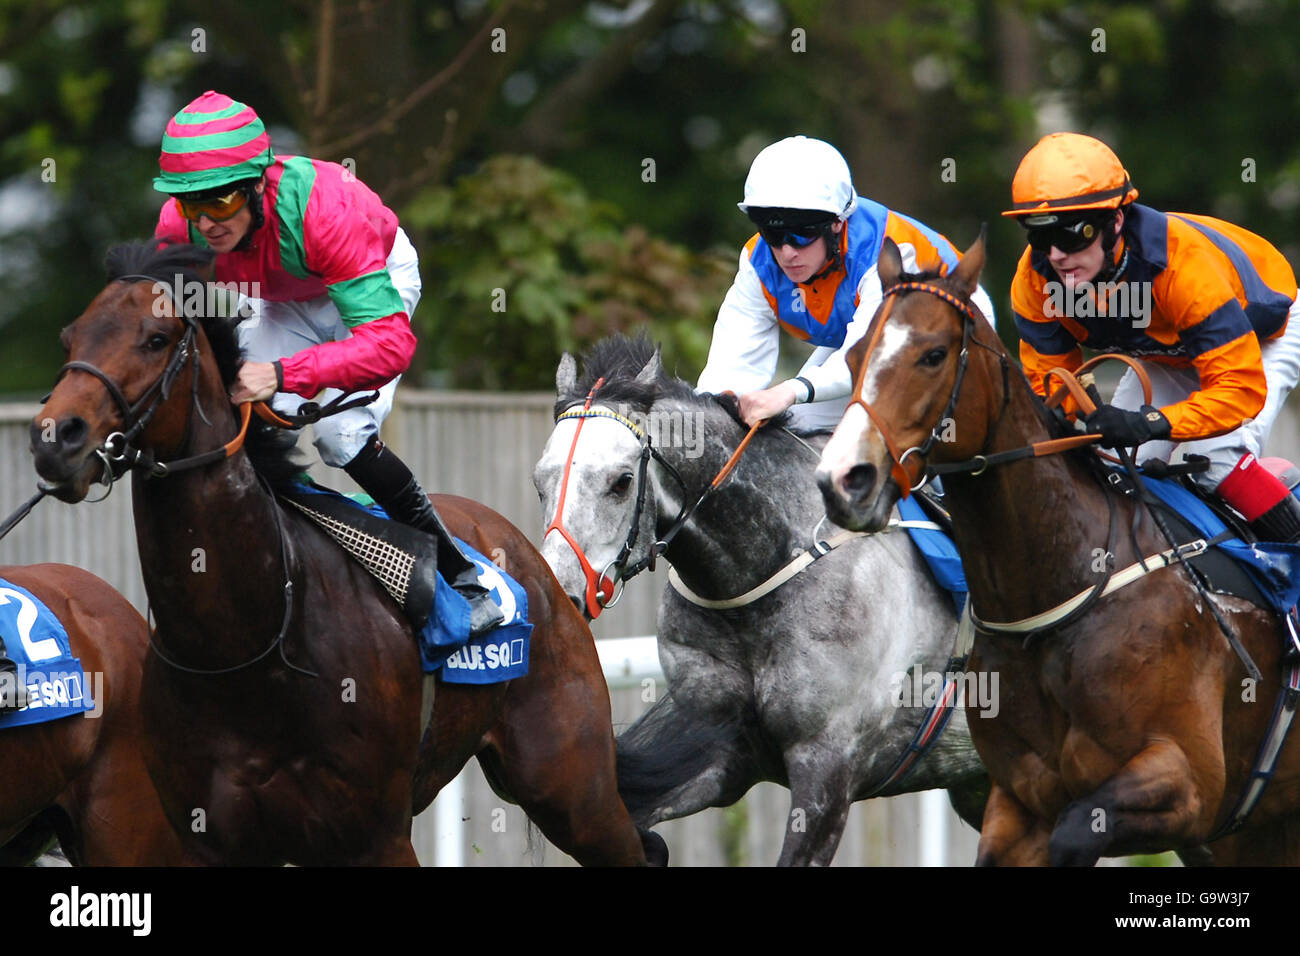 Classic Encounter ridden by Richard Hughes, Pic Up Sticks ridden by Richard Kingscote and Handsome Cross ridden by Adrian Nicholls in The Get Exclusive Live Show Prices At Bluesq.com Stakes Stock Photo